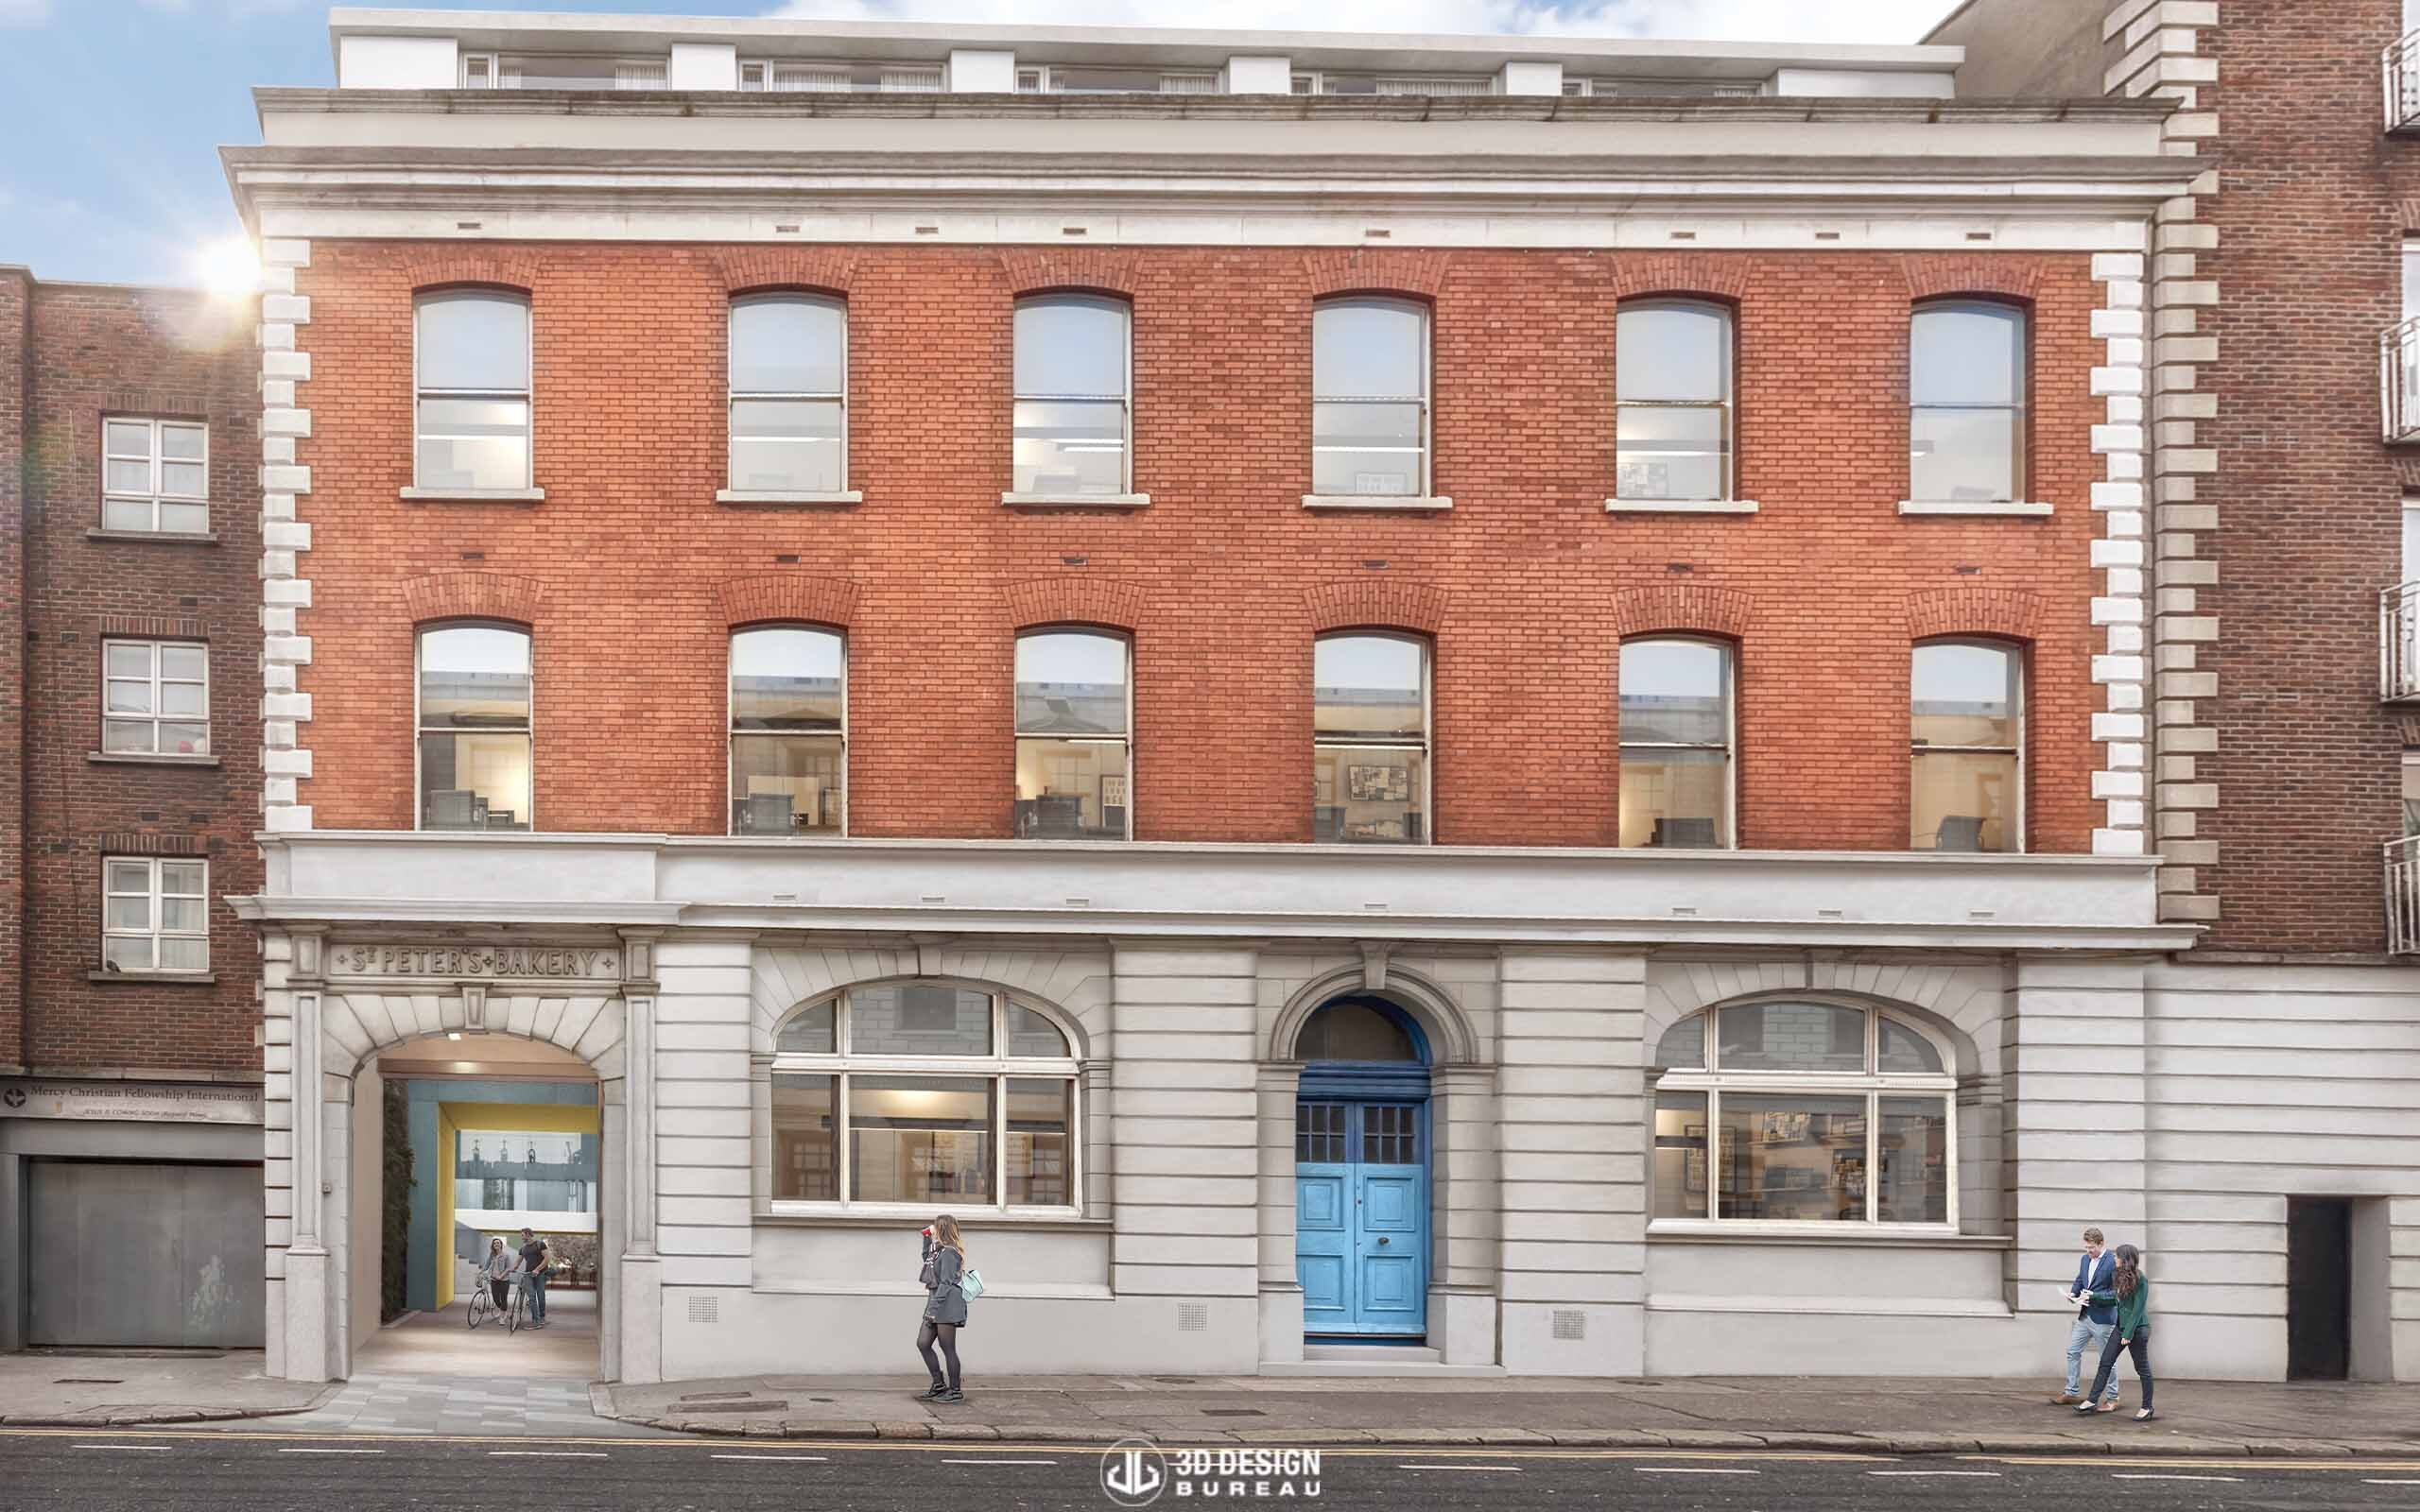 Architectural CGI of Student Accommodation in Parnell Street